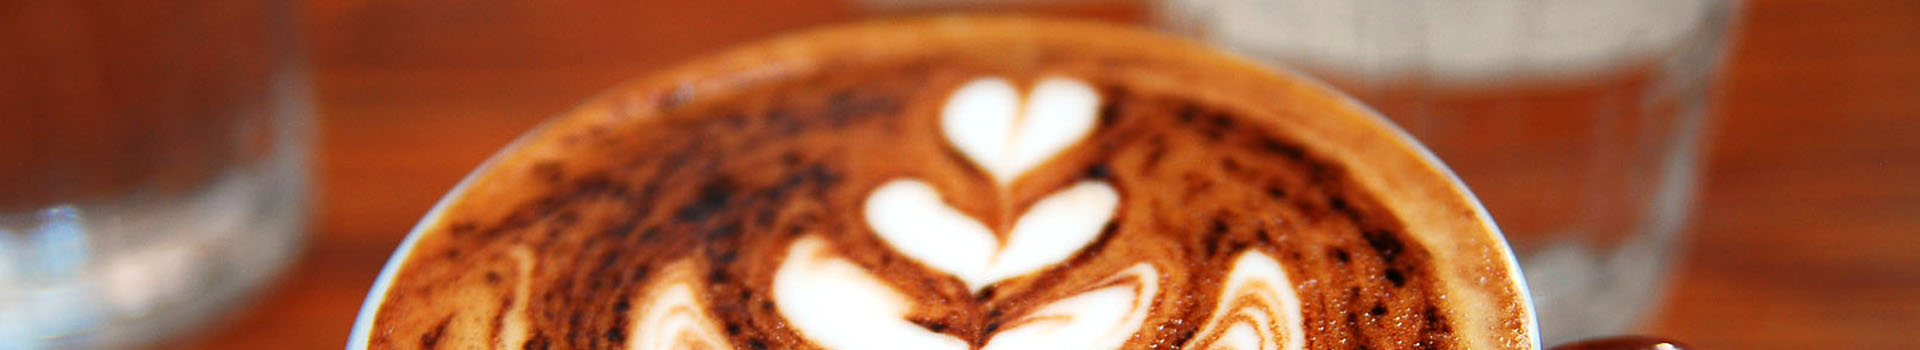 Close-up image of a coffee with a rosetta pattern